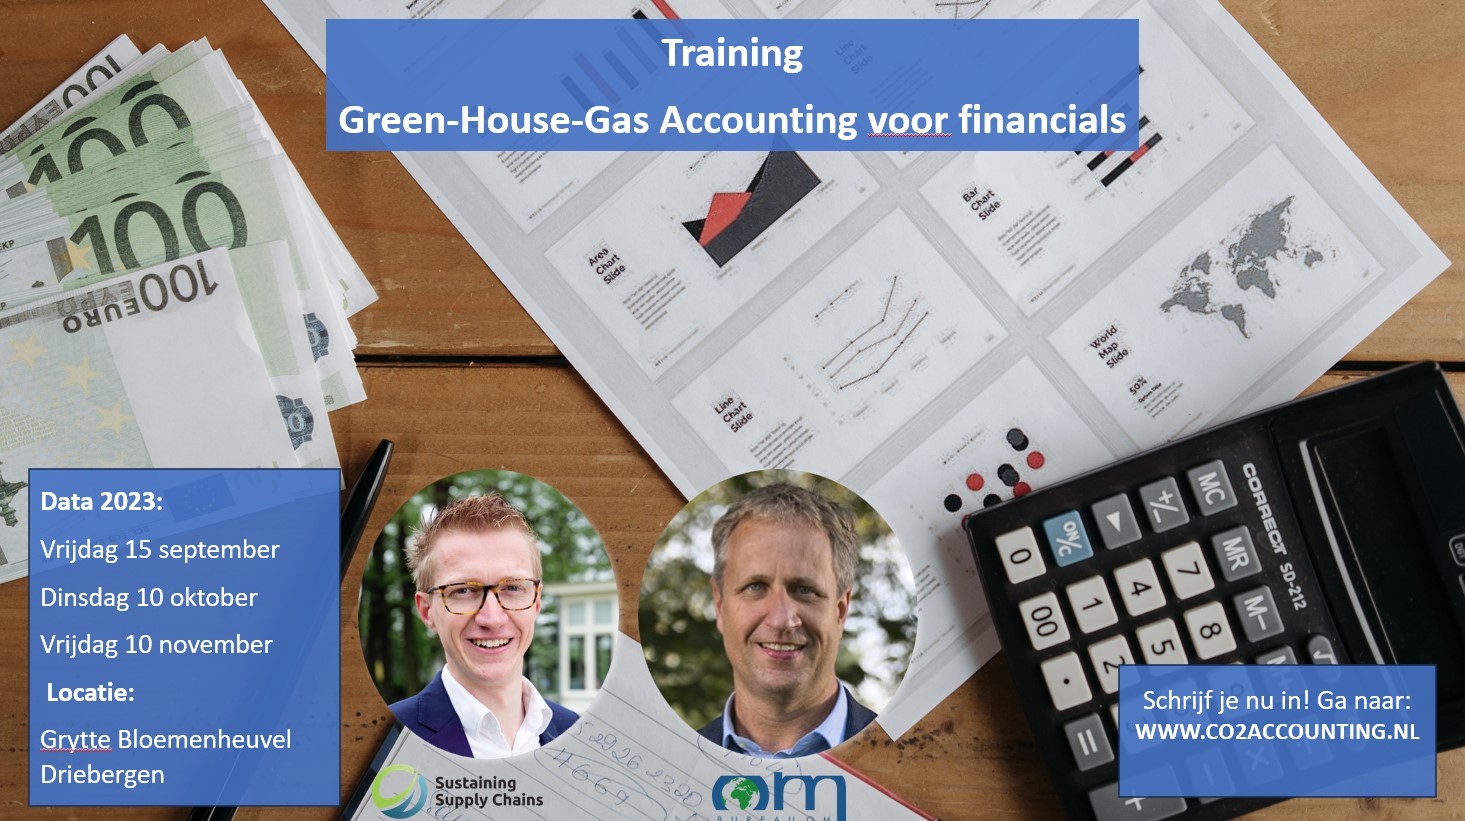 Training Green-House-Gas Accounting voor financials